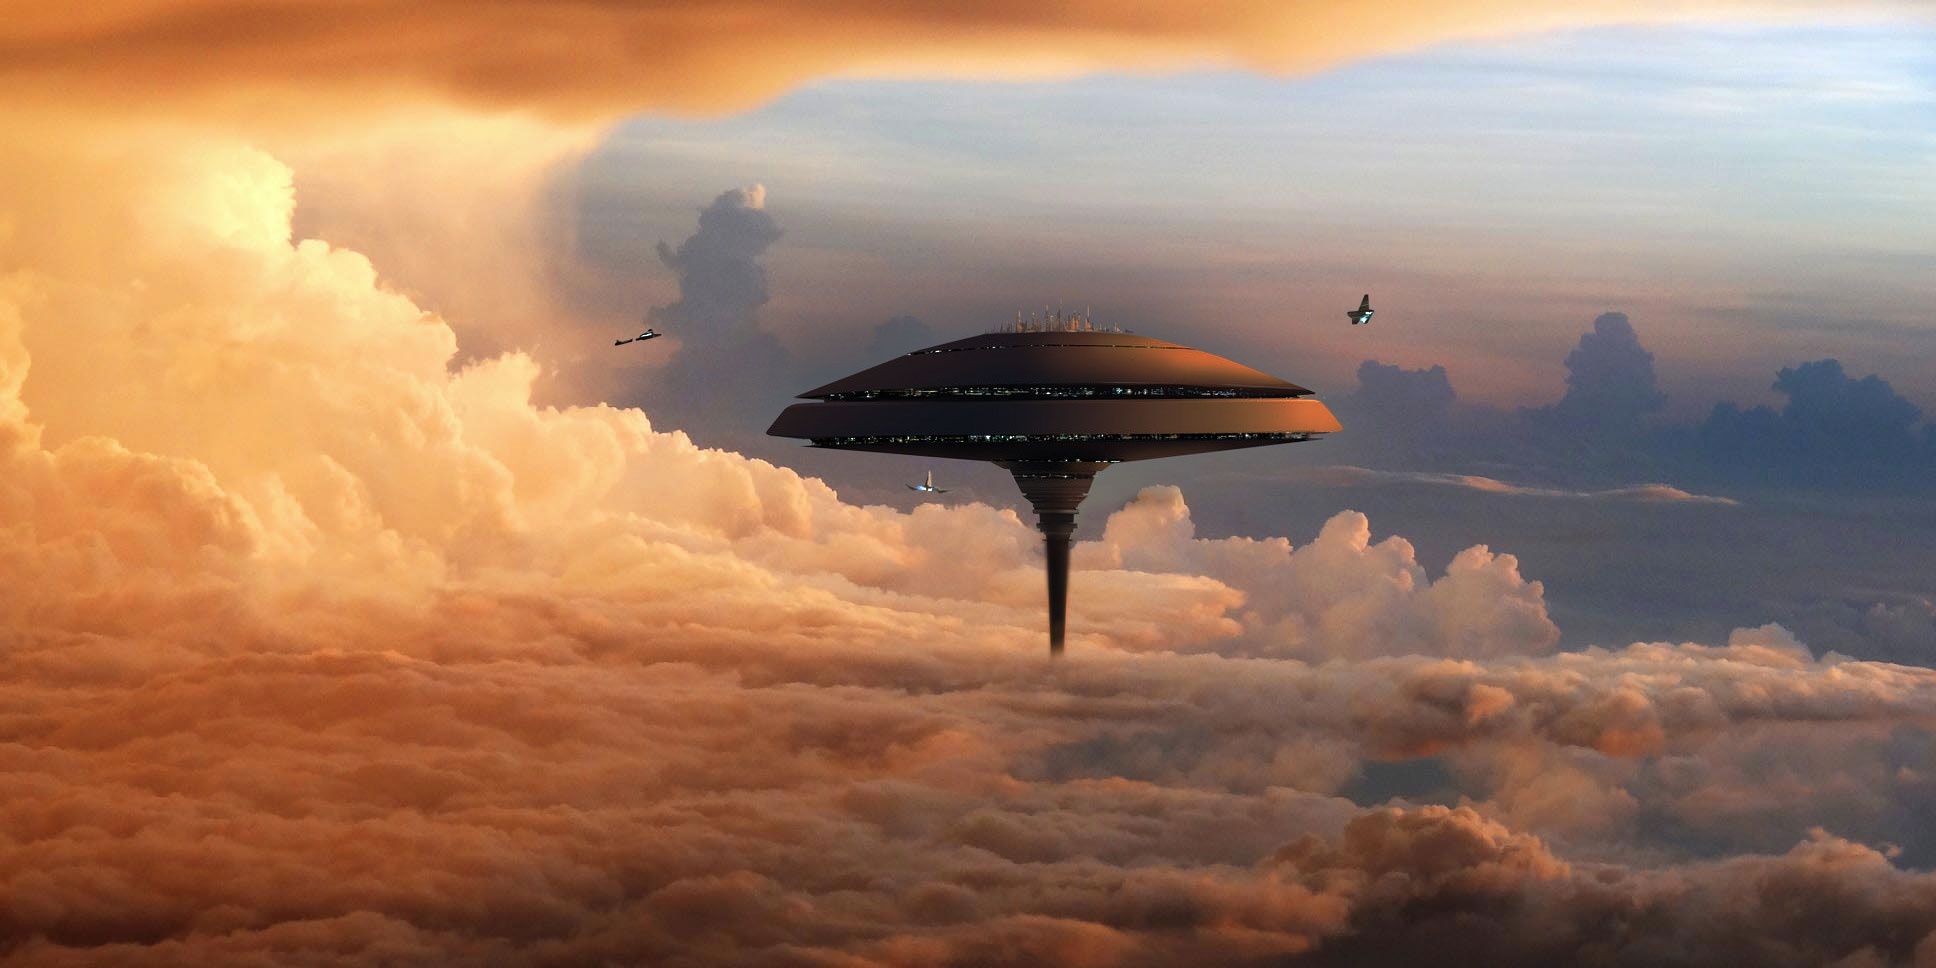 Cloud City as seen in numerous Star Wars movies